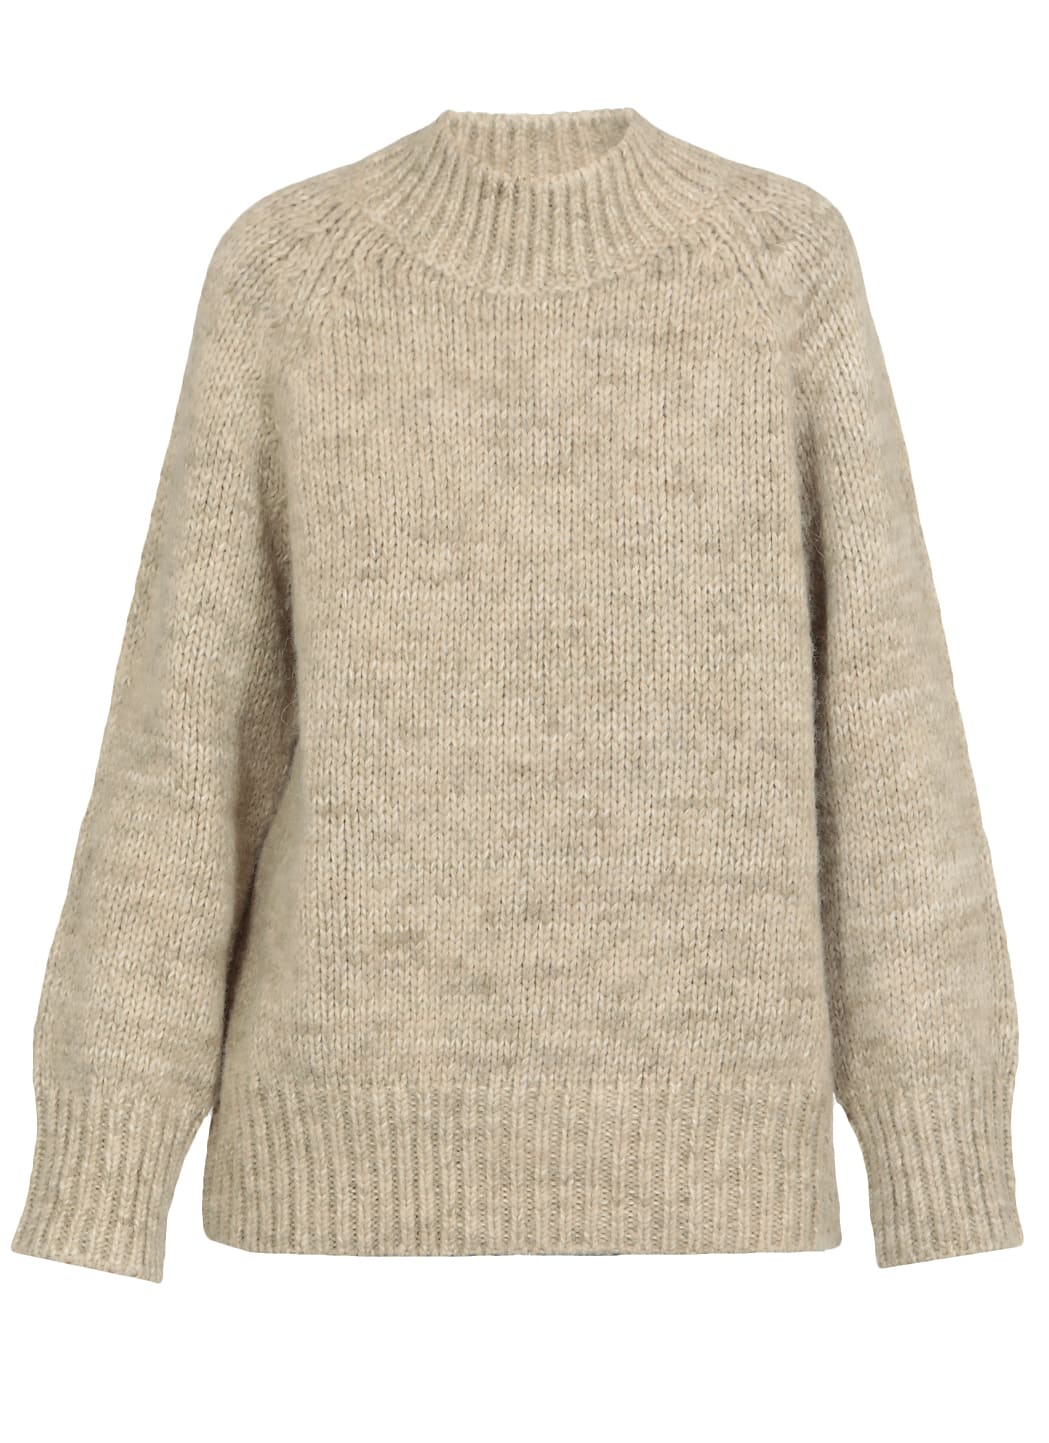 Maison Margiela Thick Knit Pullover